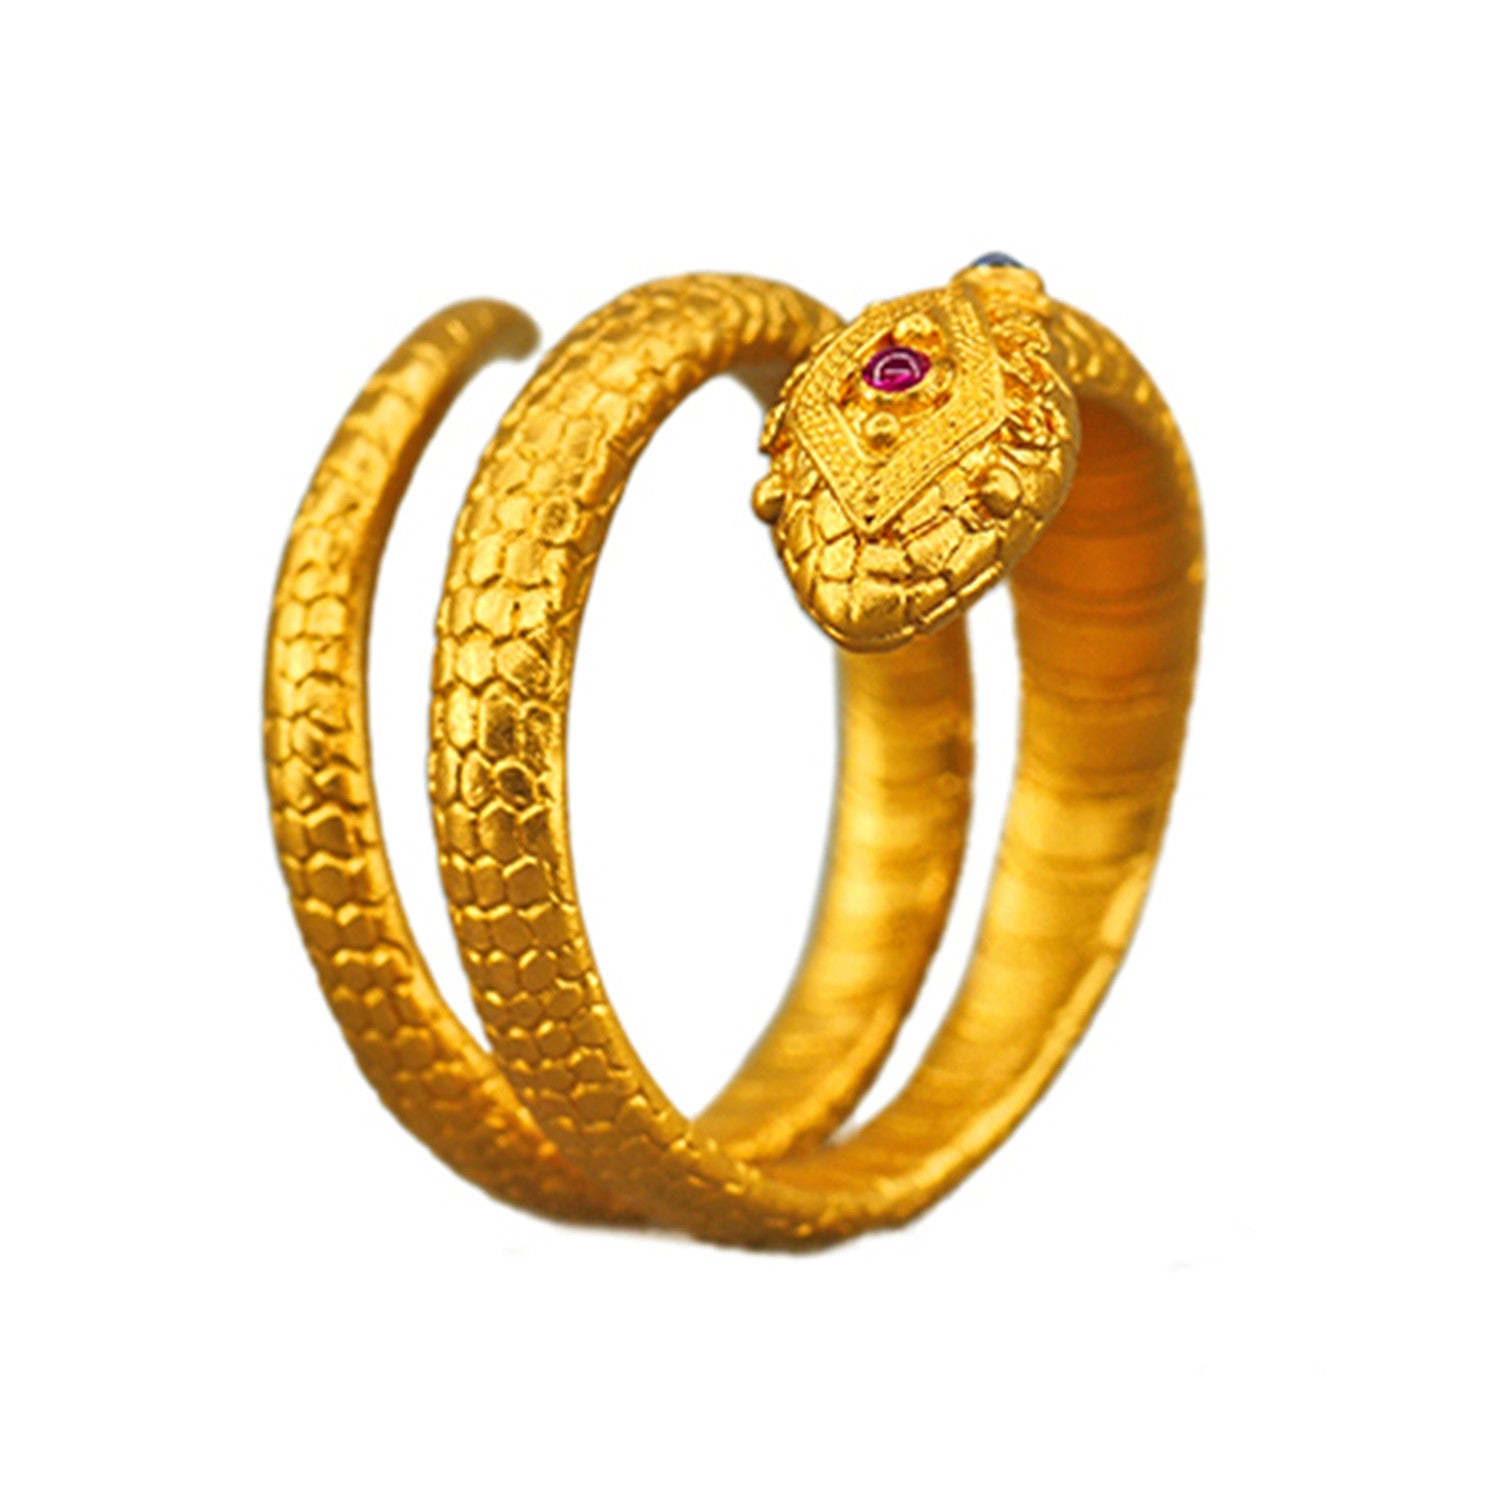 EVECOCO Full Gold Ring Hand Forging Filigree Inlay,Snake Shape,With Gemstone